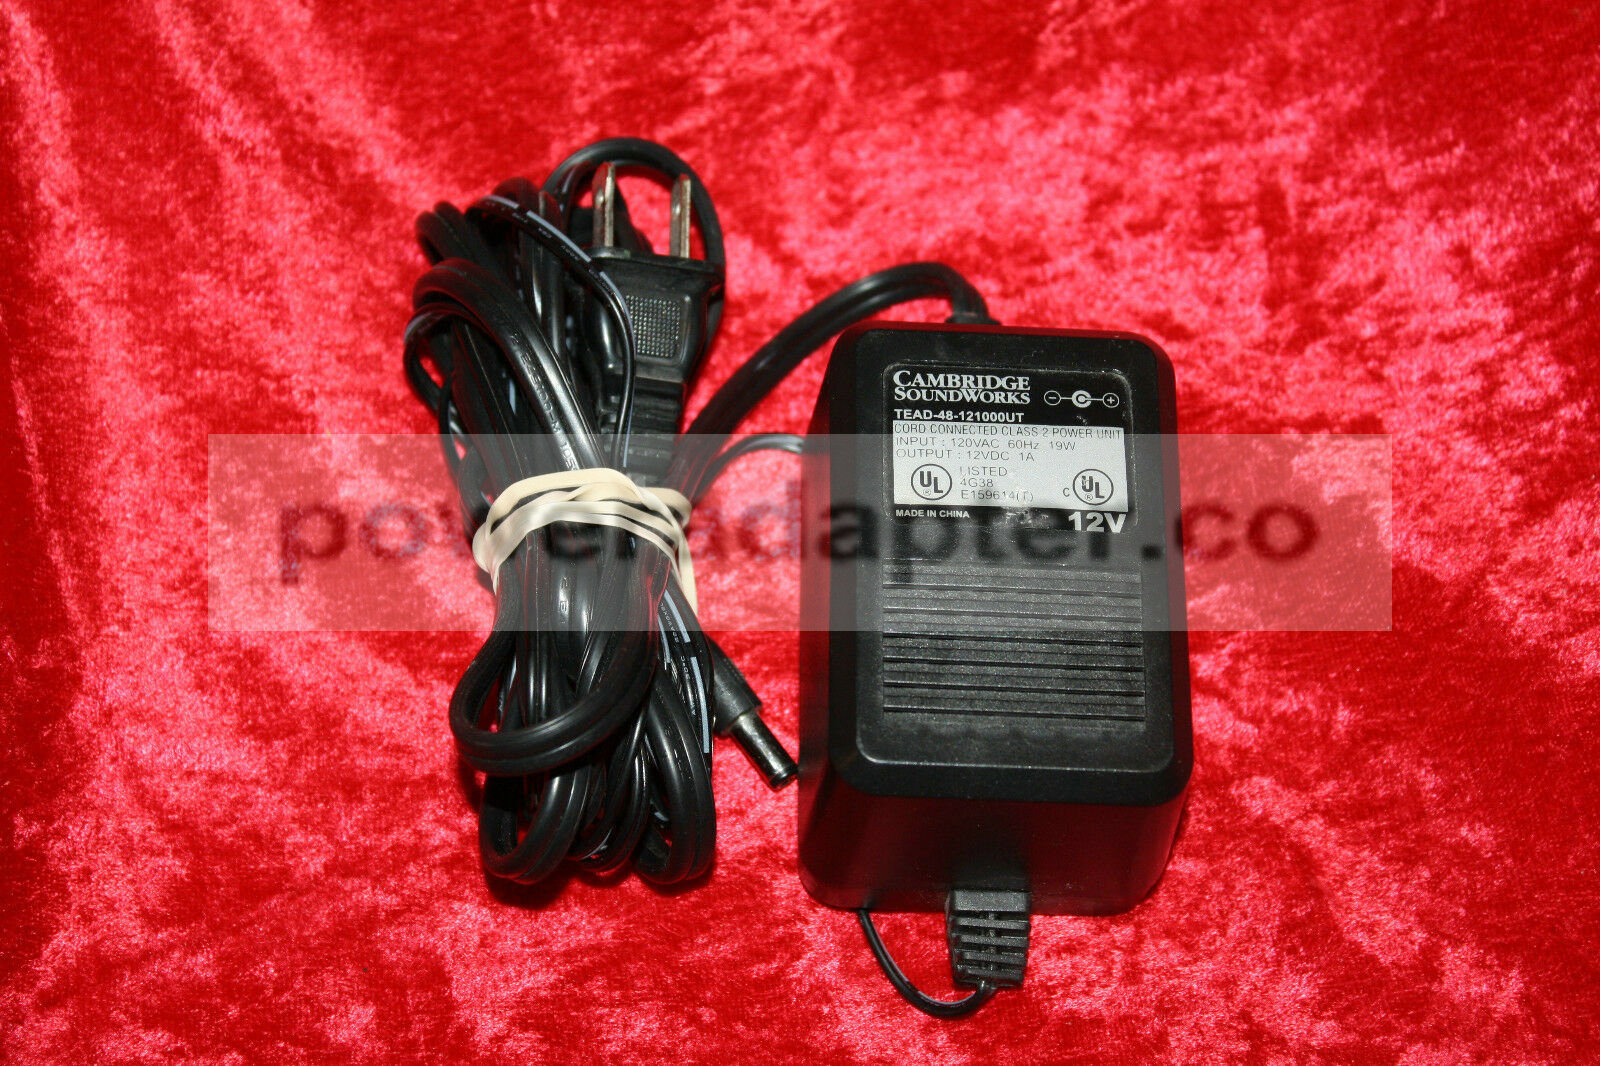 Cambridge SoundWorks Wall Power Supply AC adapter 12V DC TEAD-48-121000UT Condition: Used: An item that has been u - Click Image to Close